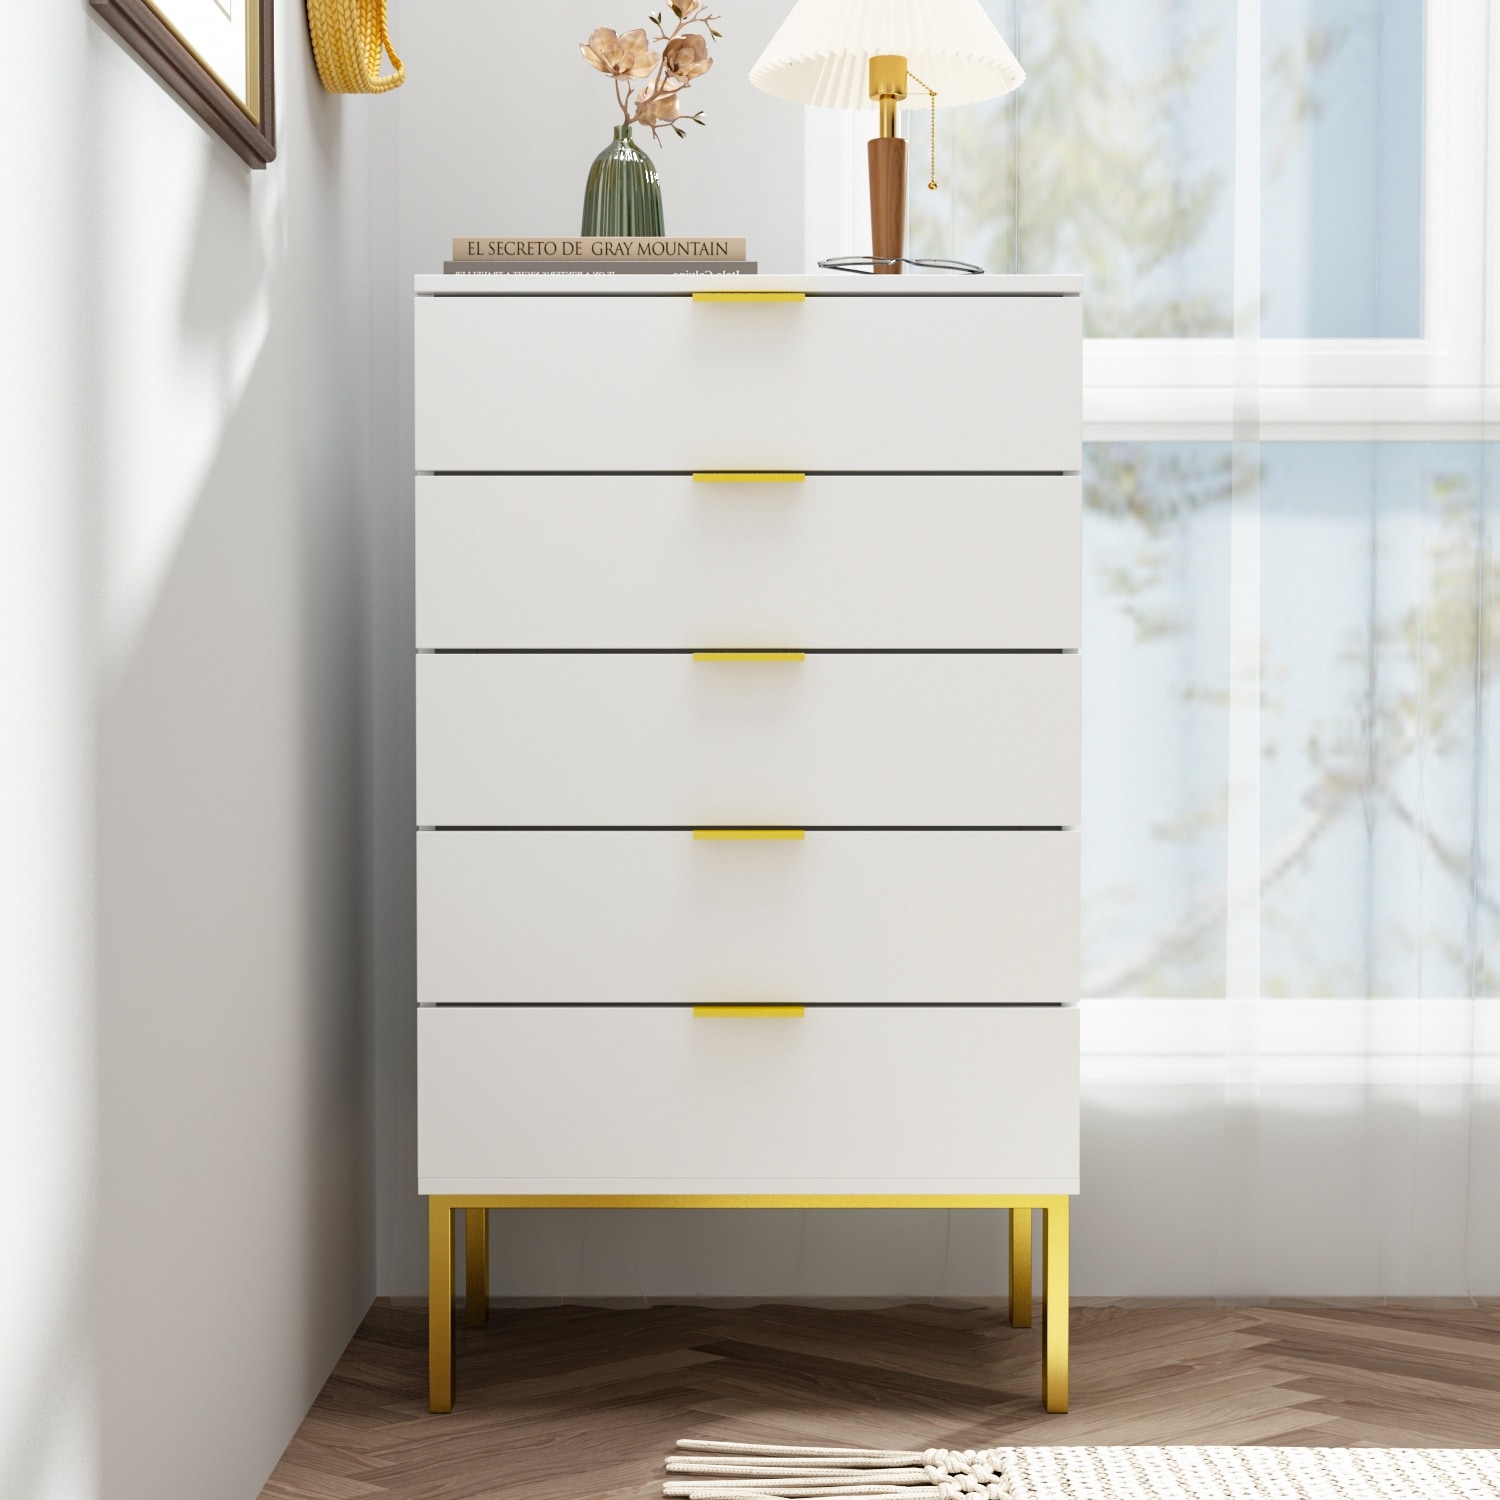 https://ak1.ostkcdn.com/images/products/is/images/direct/20872731b289dbb6301eaea683c75c7154f04531/5-Drawer-Dresser-Storage-Tower%2C-Organizer-Unit-for-Bedroom%2CChest.jpg